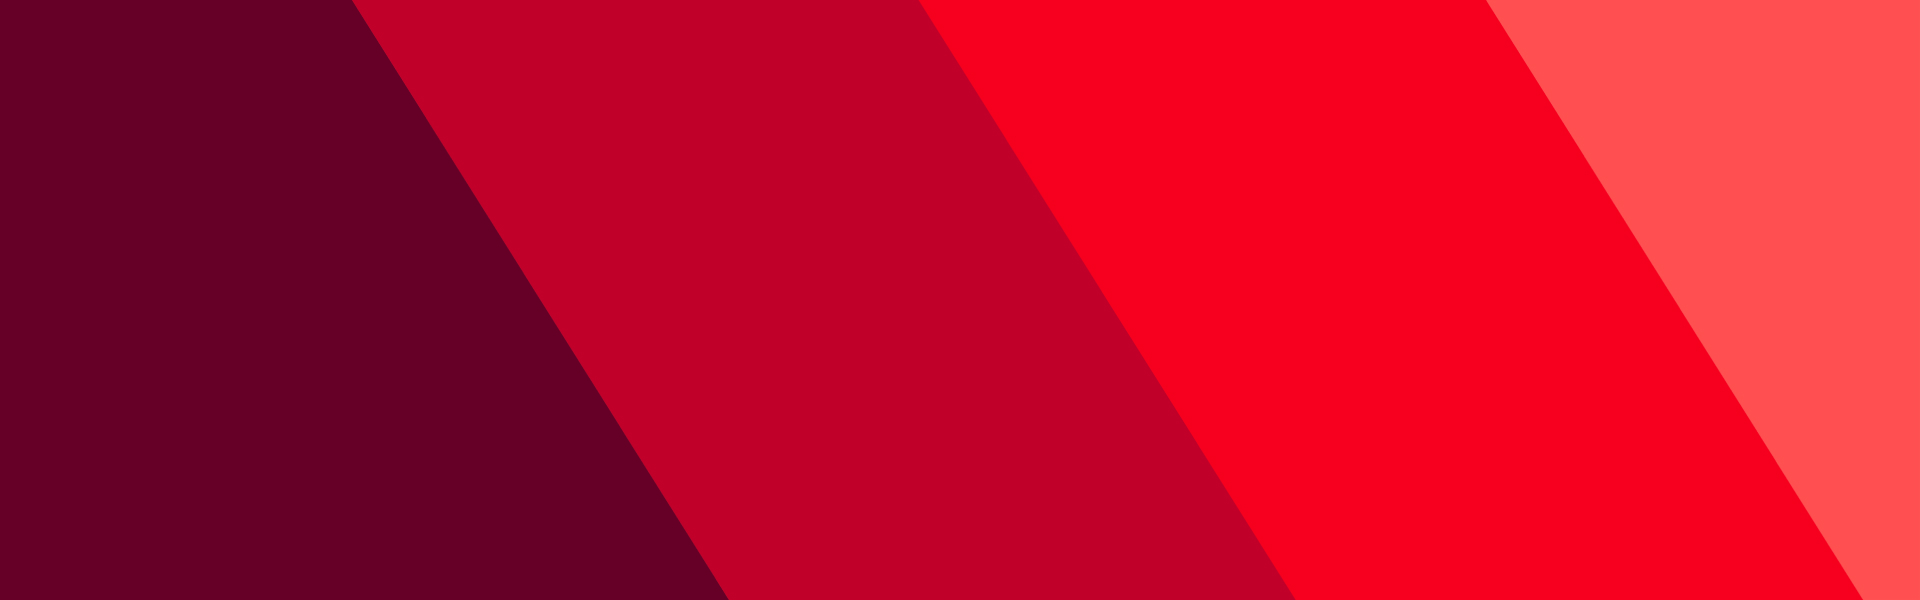 Red color gradient pattern.